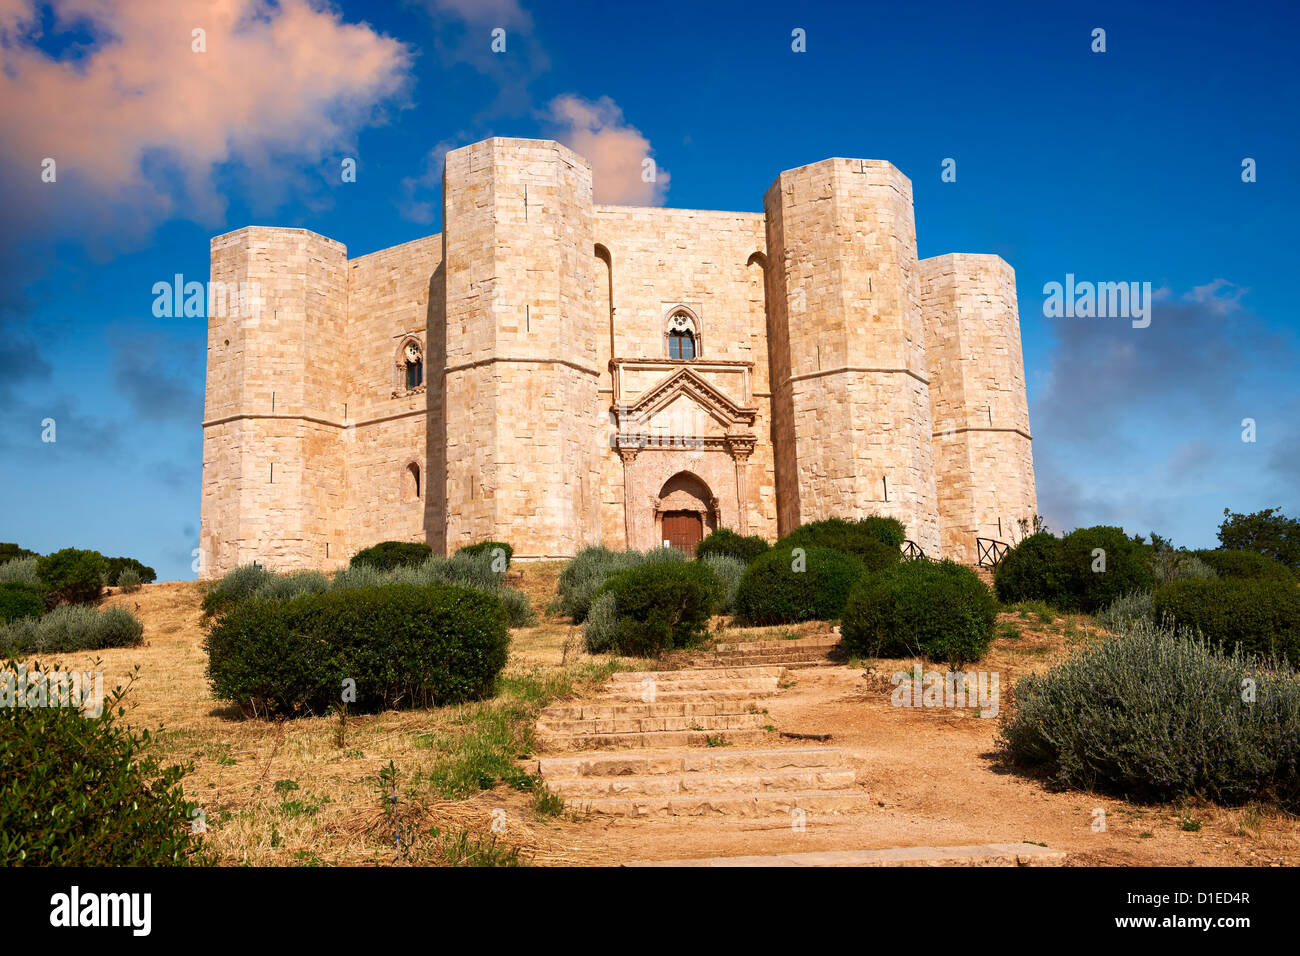 The medieval octagonal castle Castel Del Monte, built by Emperor Frederick II in the 1240's near Andria in the Apulia , Italy Stock Photo